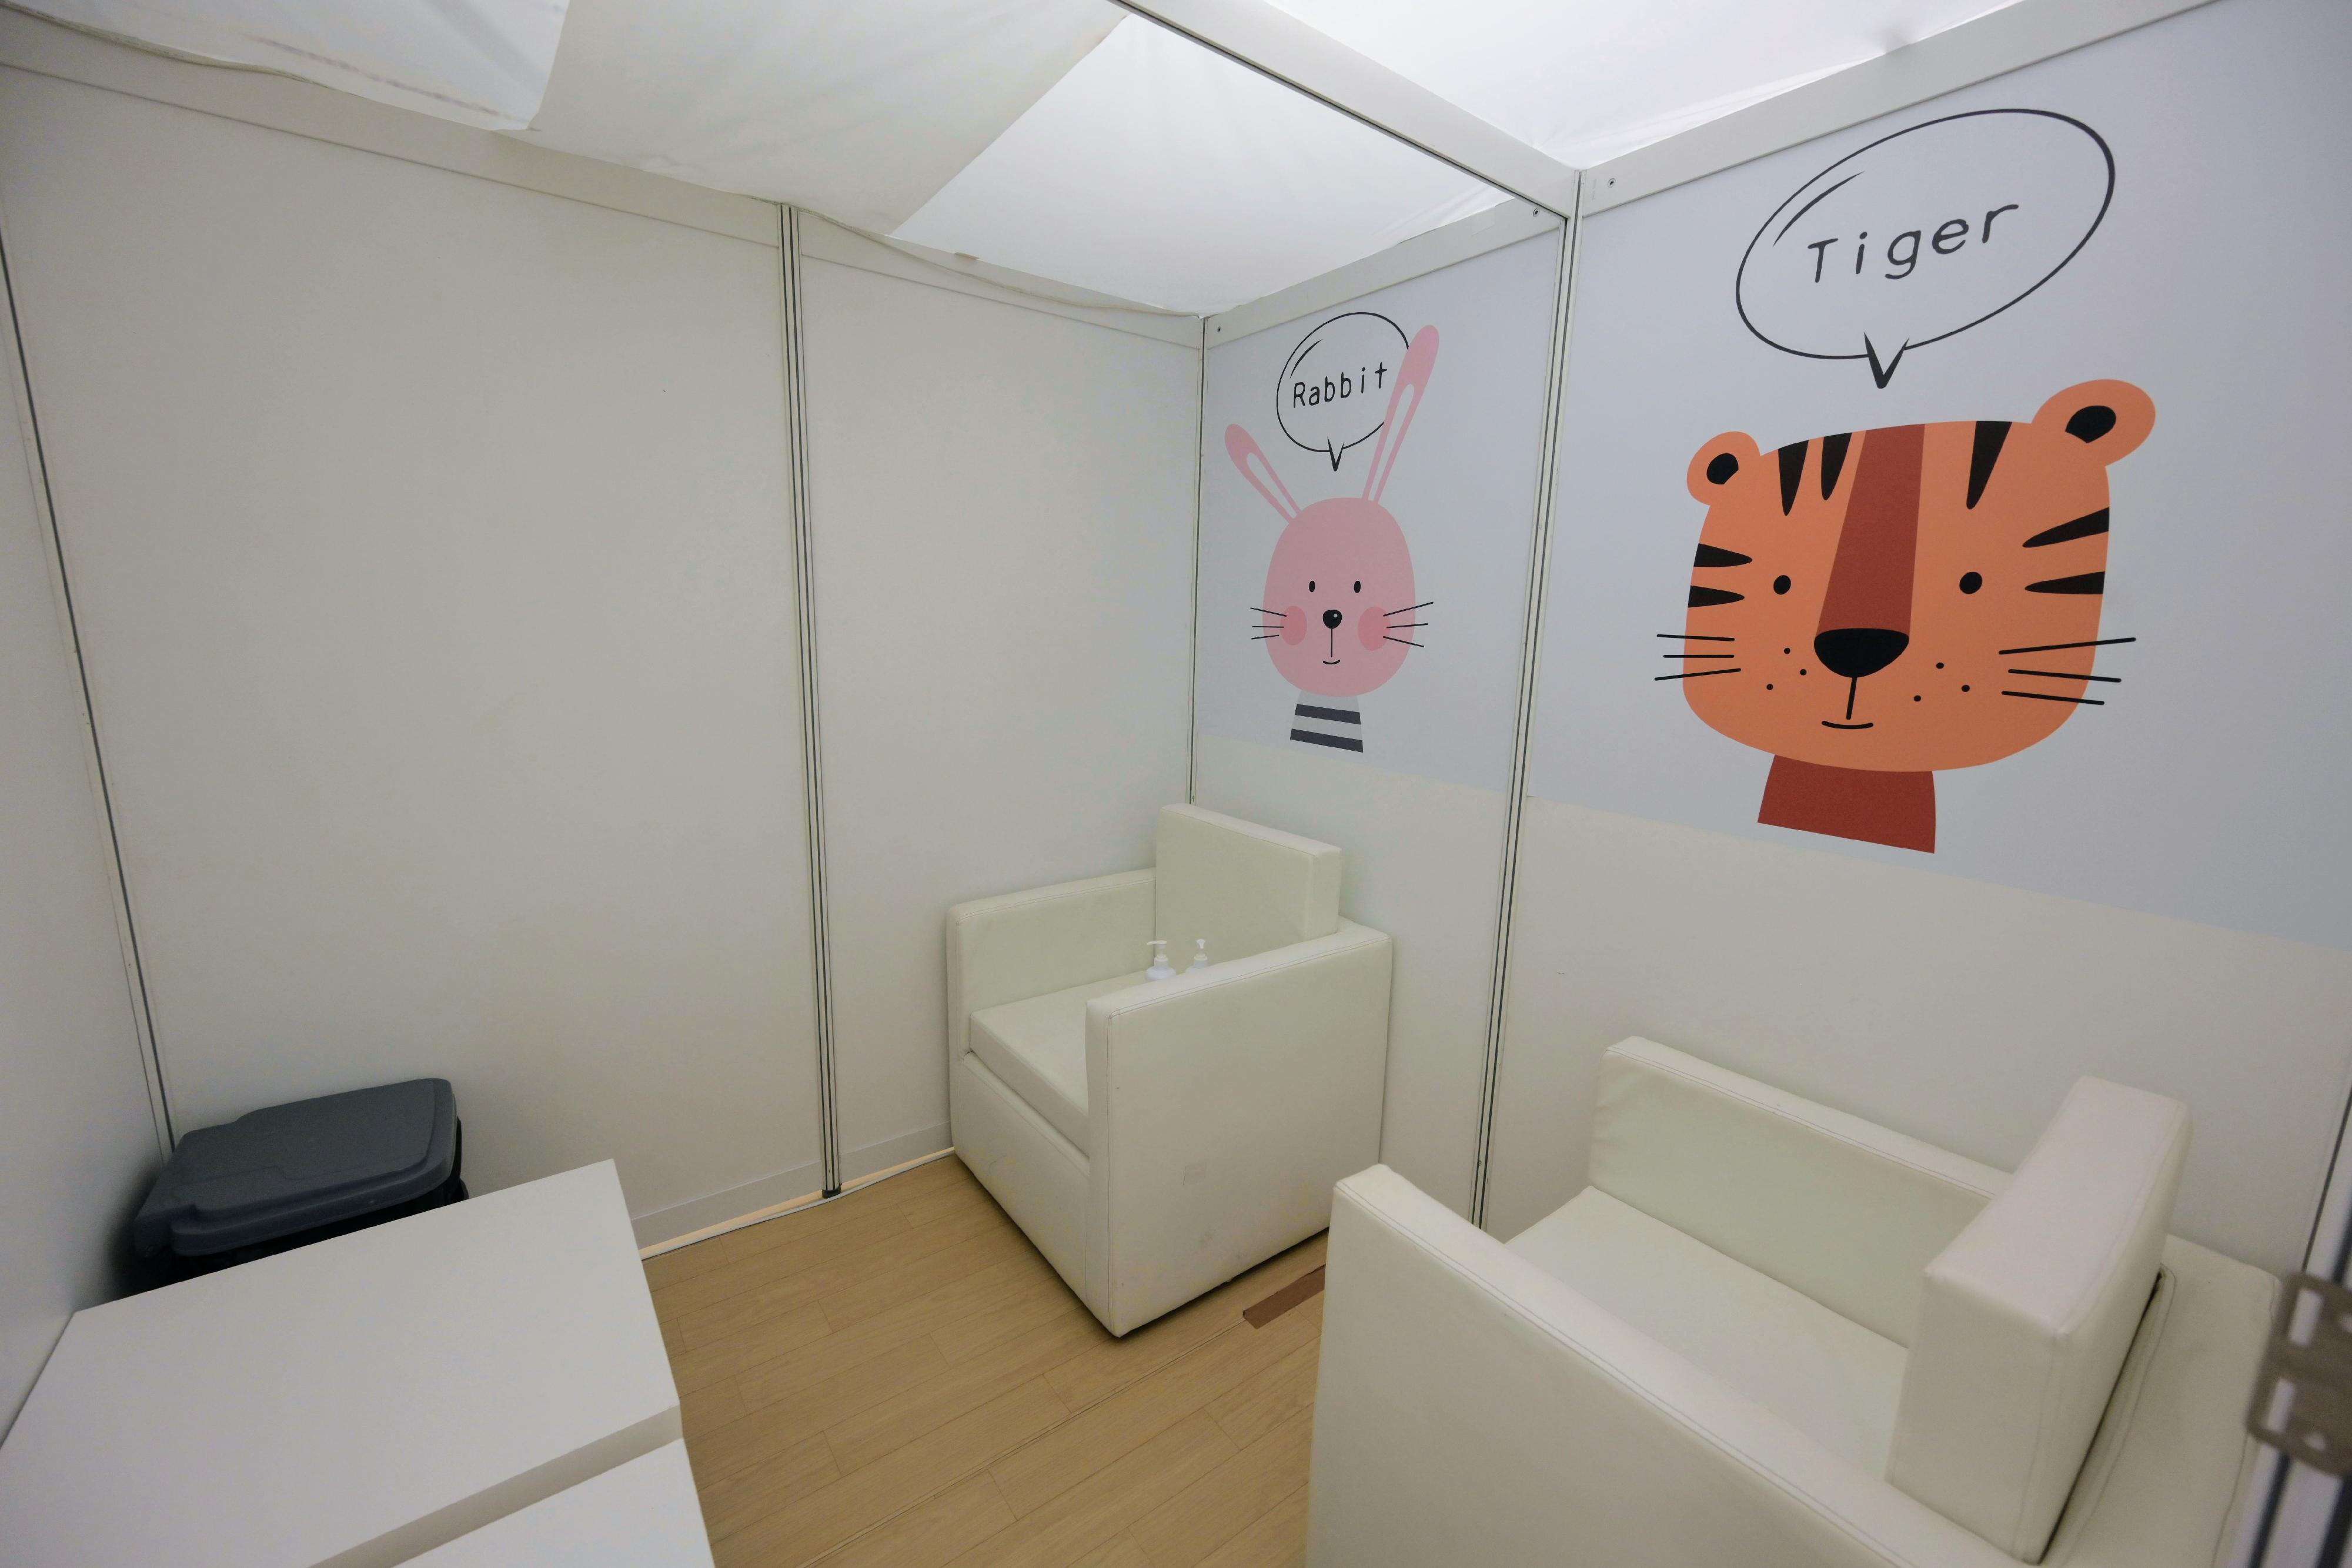 Children aged from 6 months to 3 years may receive the Sinovac vaccine starting from today (August 4). In order to let children receive vaccination in a more relaxing environment, five Community Vaccination Centres (CVCs) providing the Sinovac vaccine have retrofitted some vaccination booths specifically for children and decorated them with stickers of animal cartoons. Photo shows a breastfeeding room set up at a CVC in Kwun Tong for parents' use when necessary.